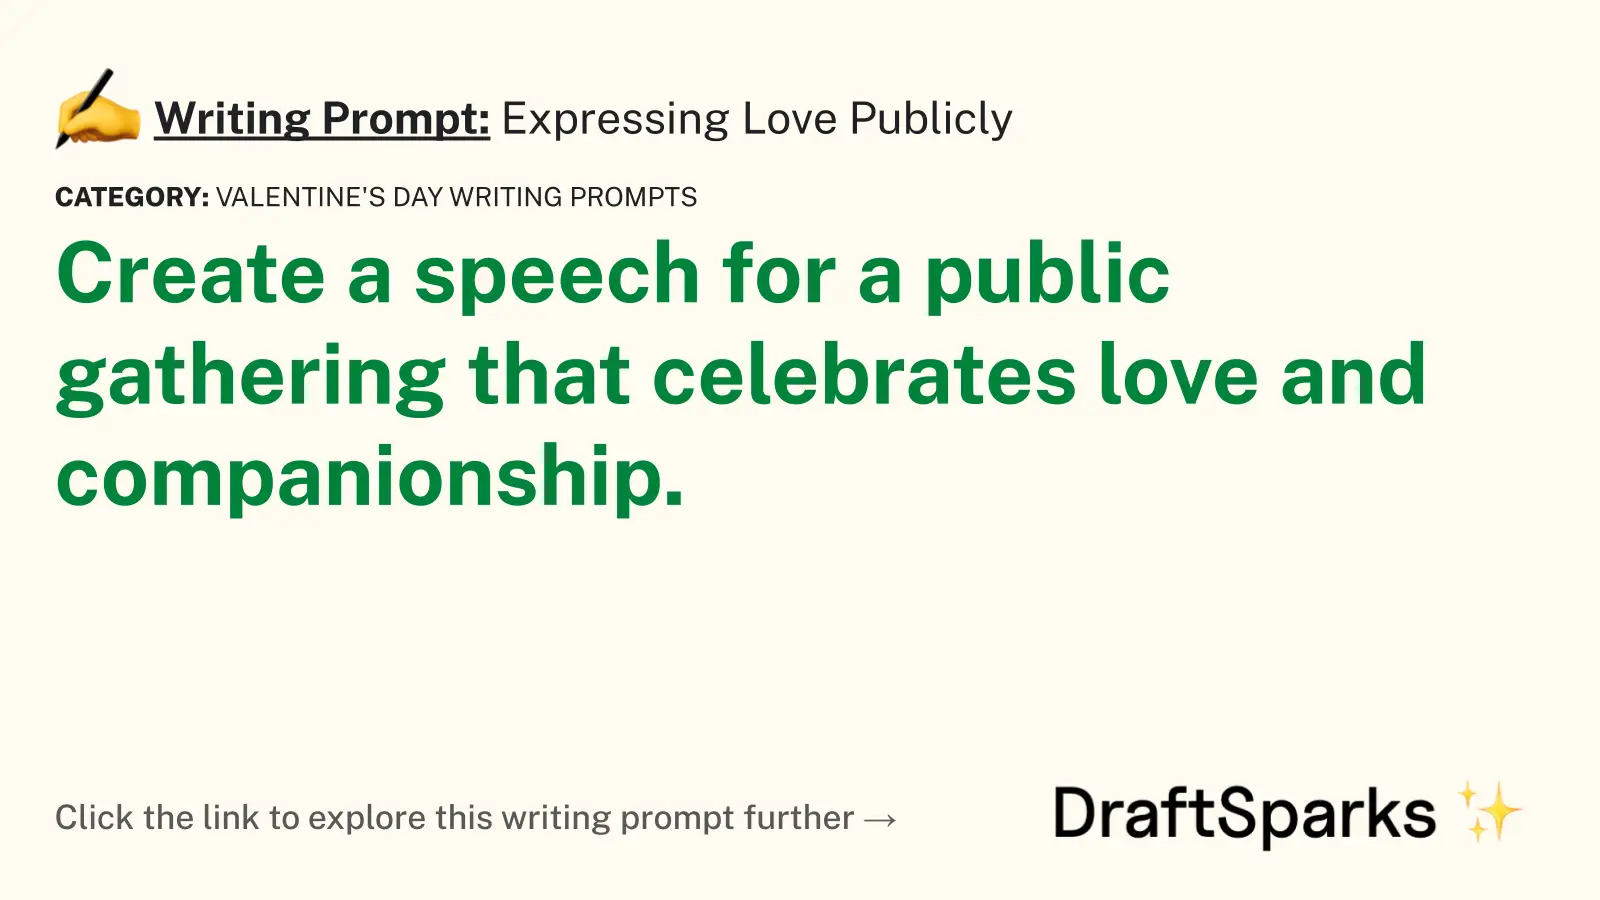 Expressing Love Publicly